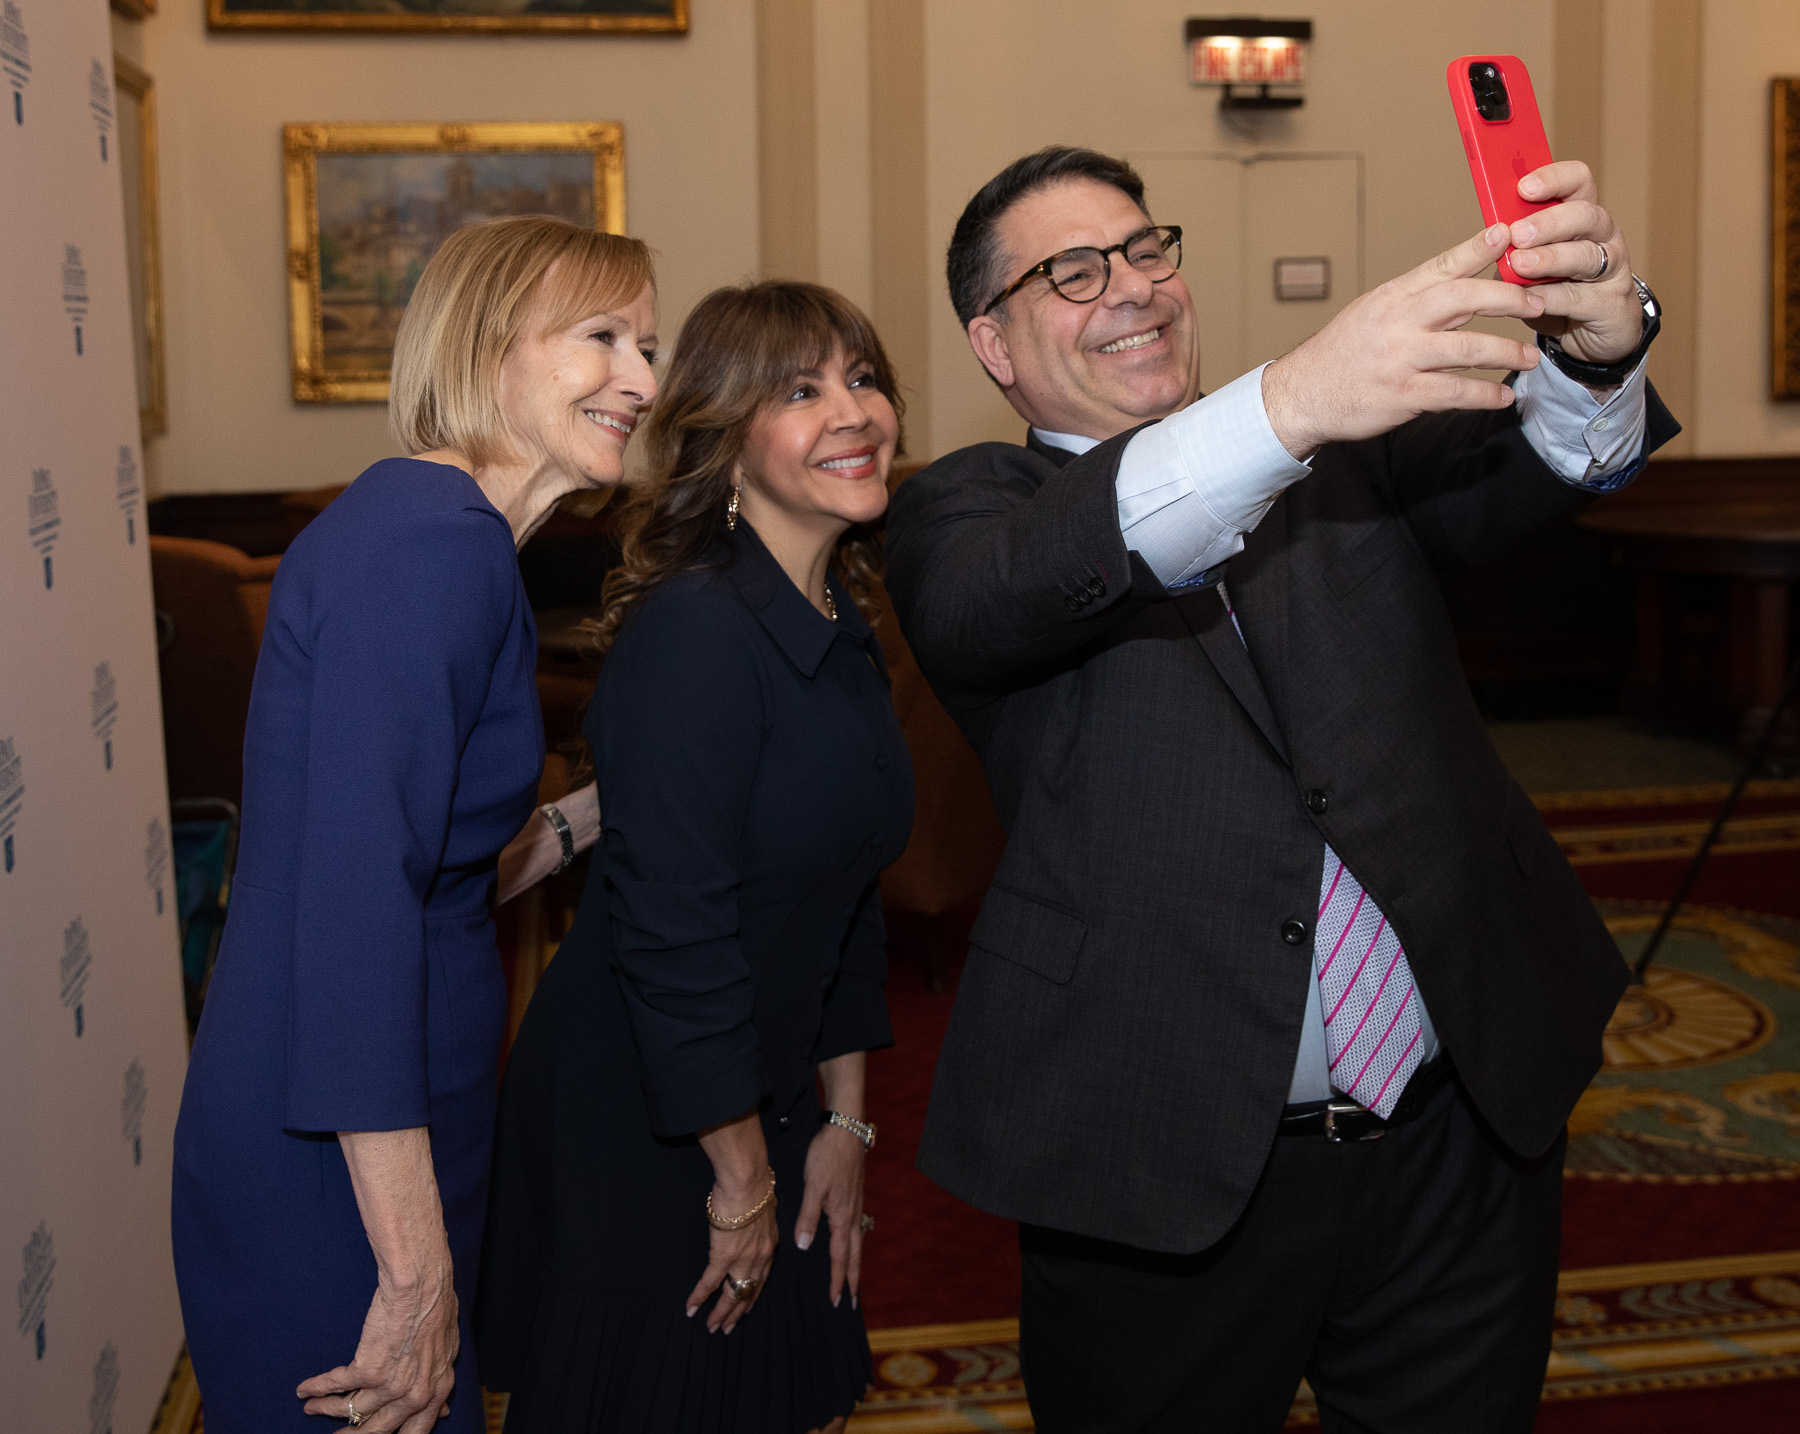 A moment of fun. DePaul President Rob Manuel engaged award recipients Judy Woodruff and Sally Ramirez for a quick selfie before the ceremony began. (Photo by Sandy Rosencrans)